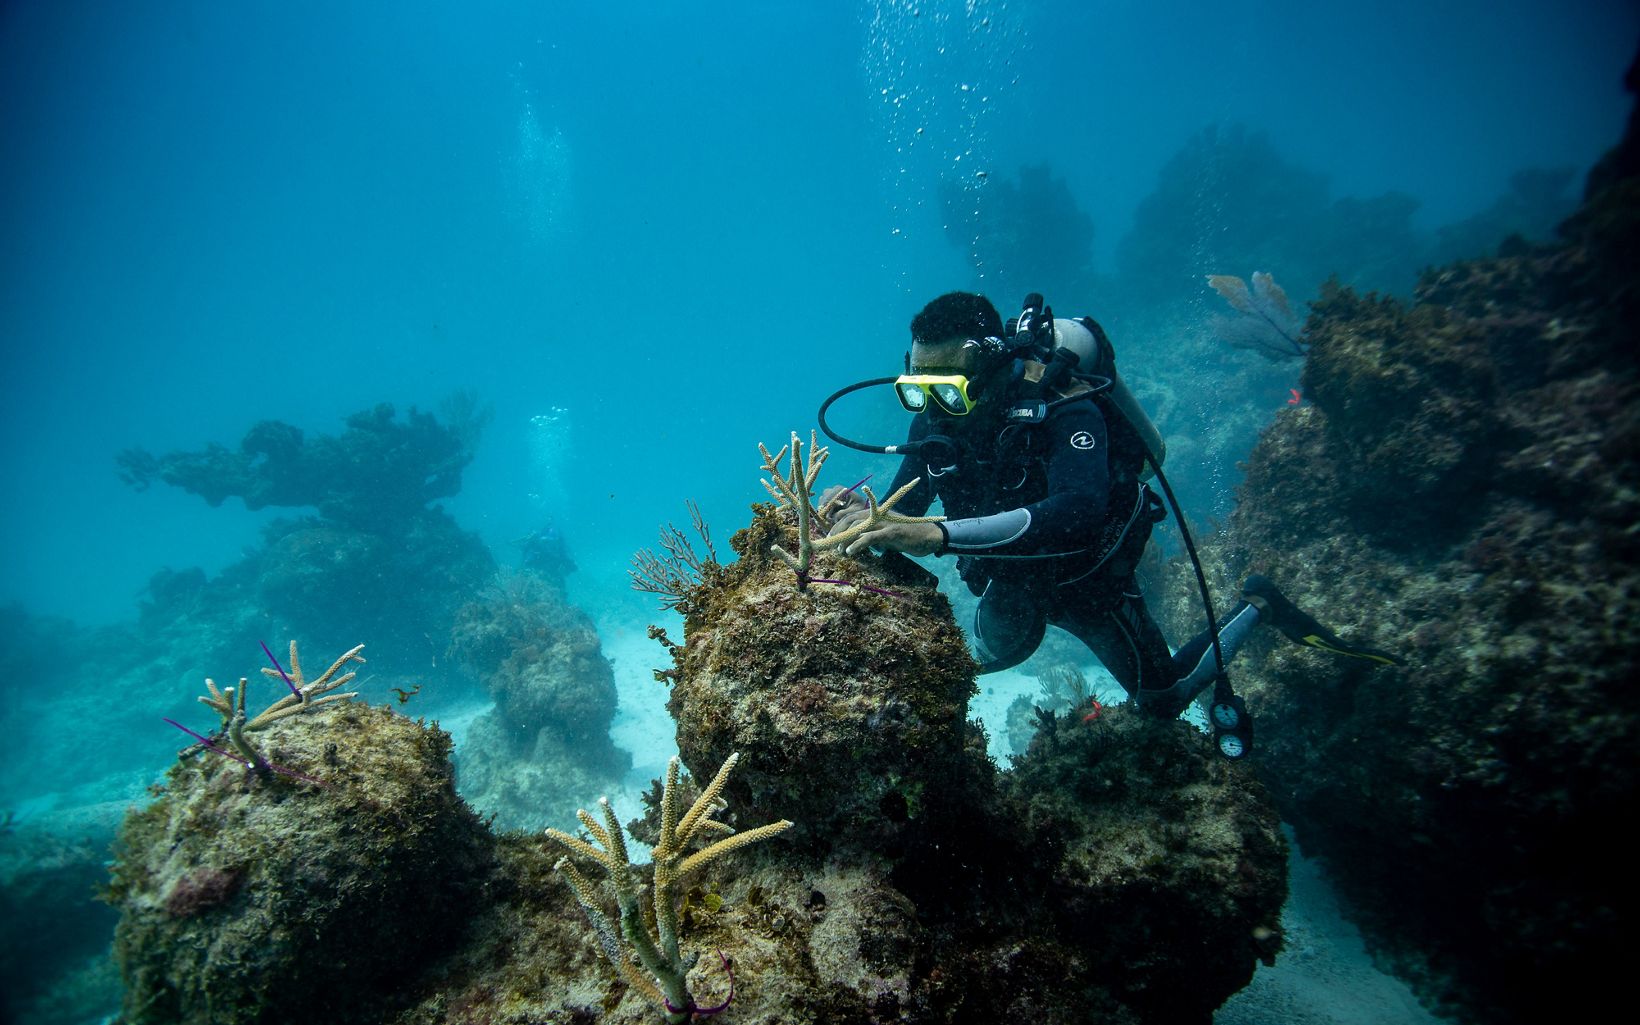 Muhajir McLauda (with TNC), photographing healthy corals and sponges in the waters off Kofiau, part of the Raja Ampat Islands of Indonesia. 